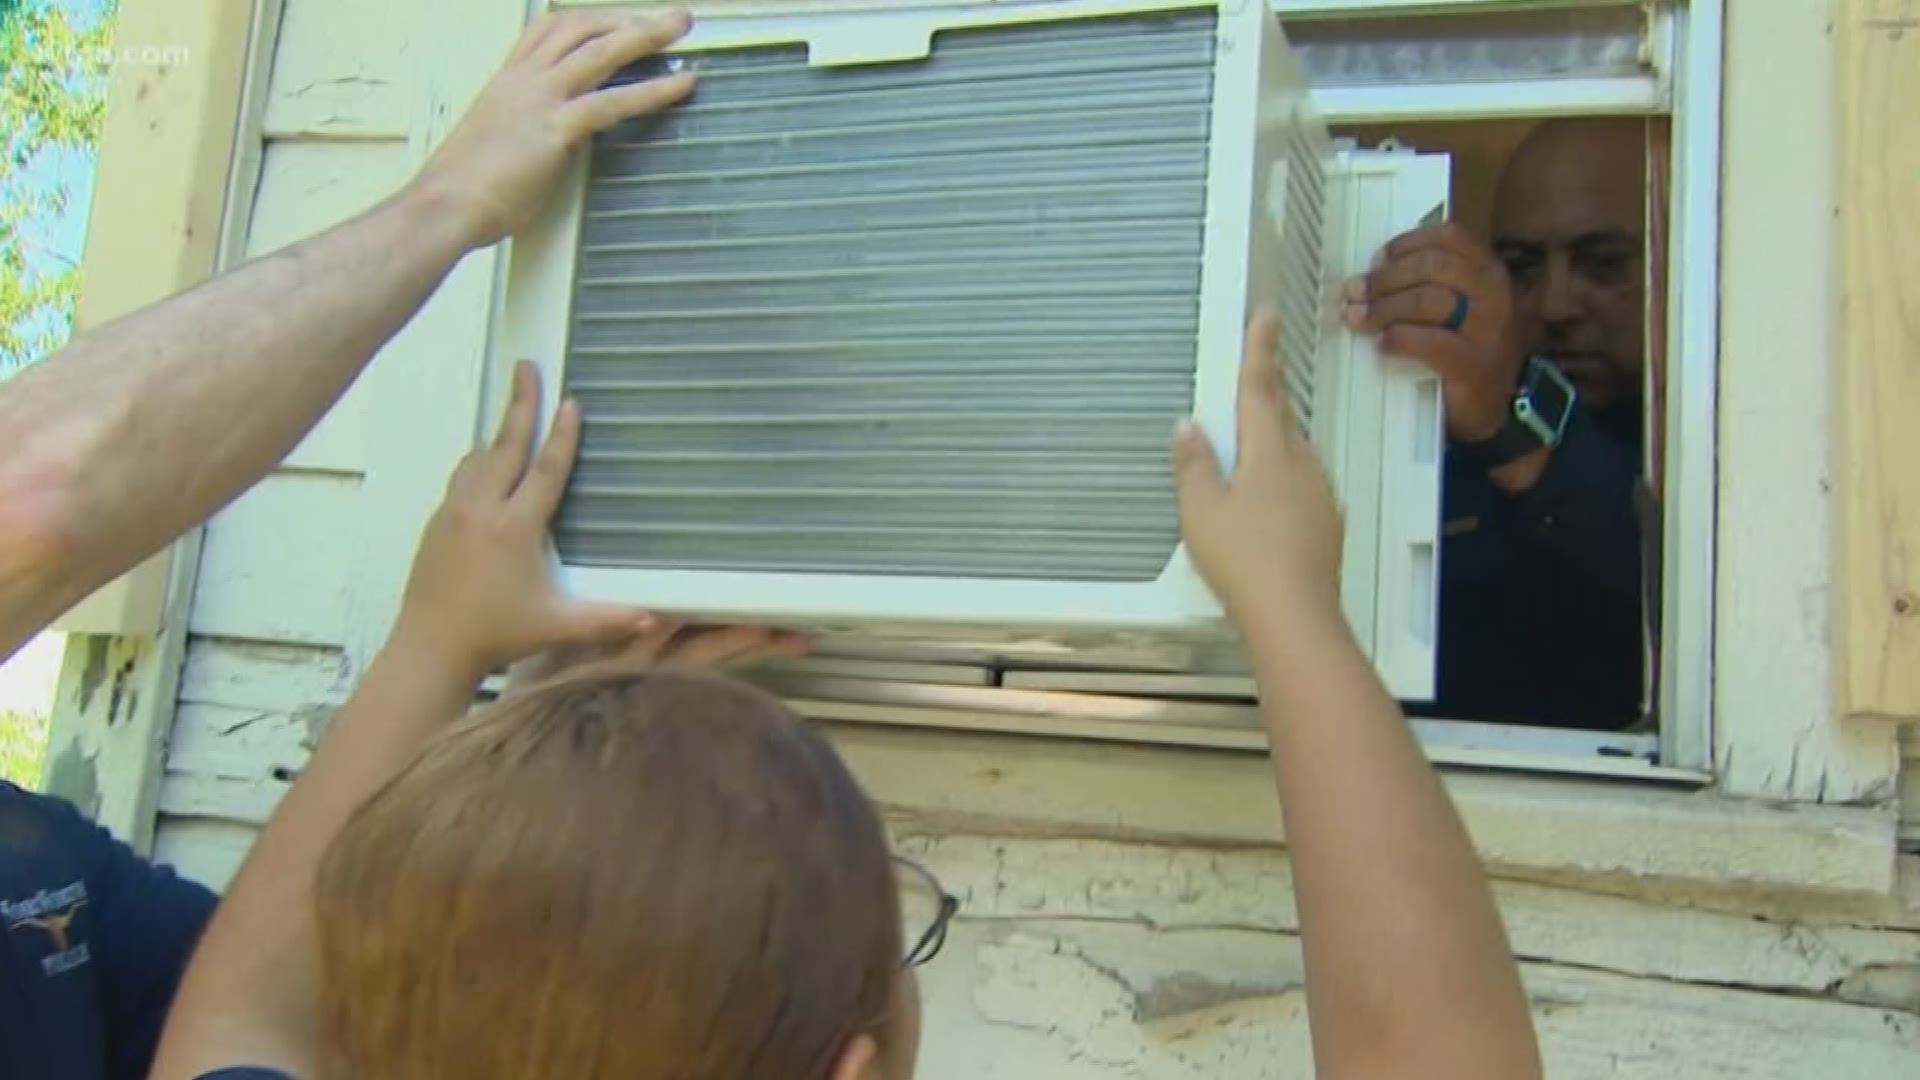 As temperatures continue to hover in the triple digits, some groups are opening cooling stations and donating air conditioners to help people cool off.